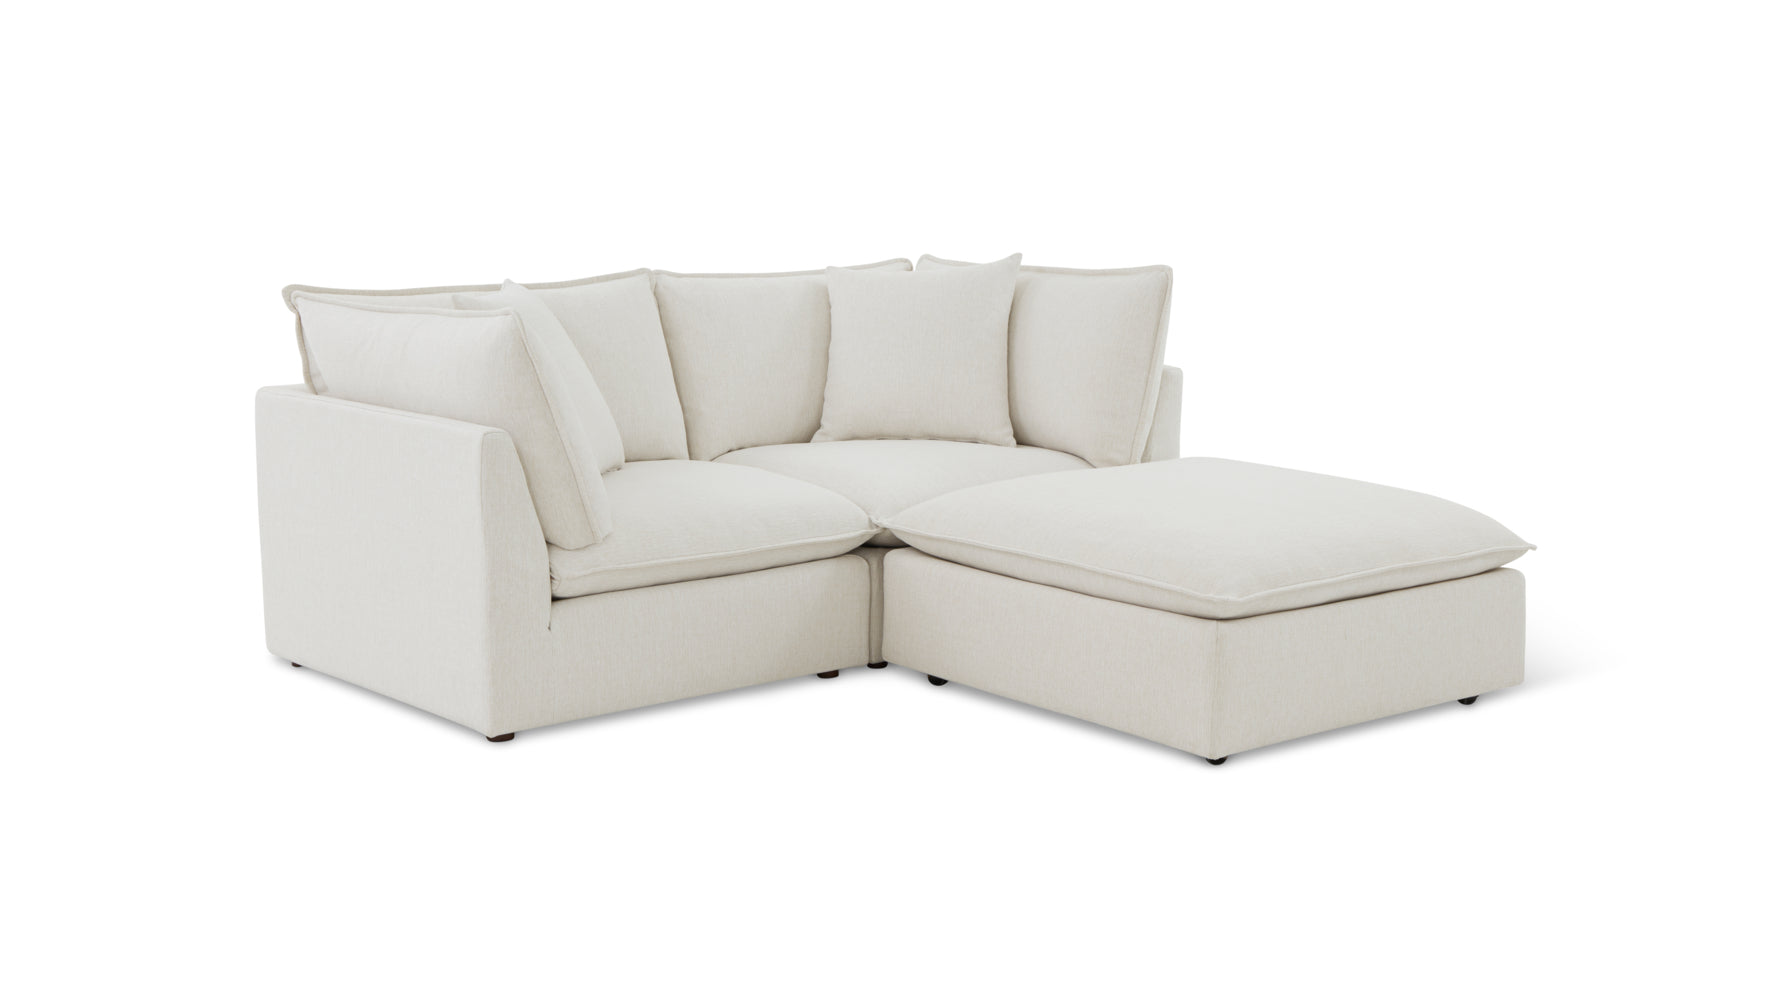 Chill Time 3-Piece Modular Sectional, Birch - Image 2